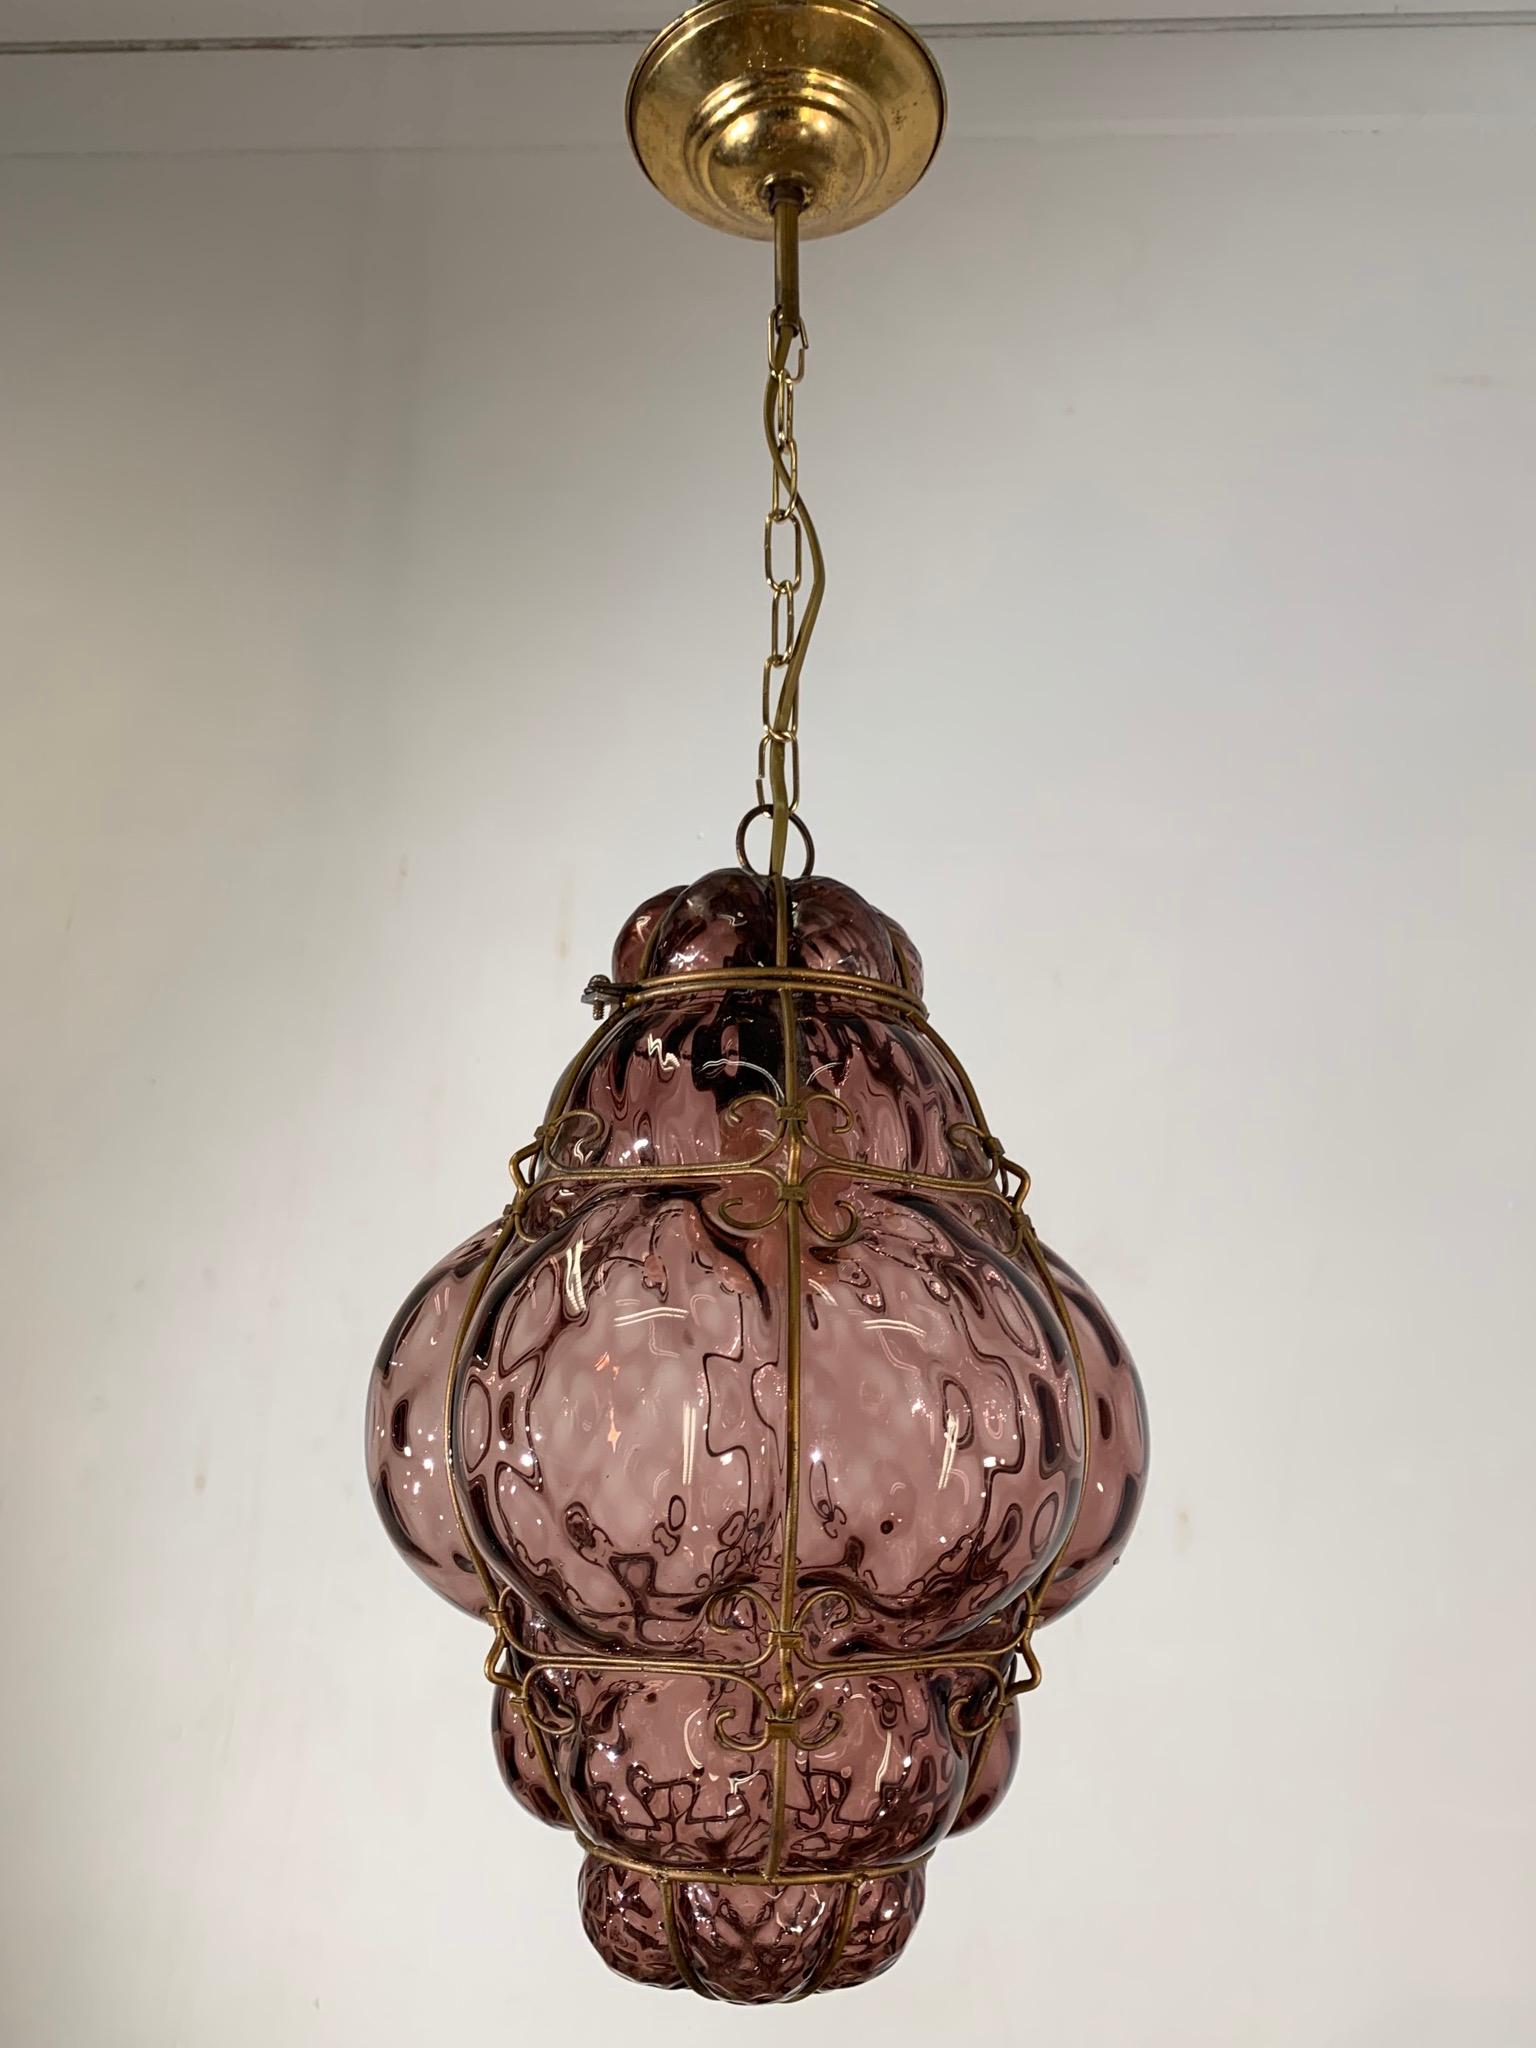 Hand-Crafted Antique Italian Venetian Murano Pendant Light Mouthblown Purple Glass in Frame